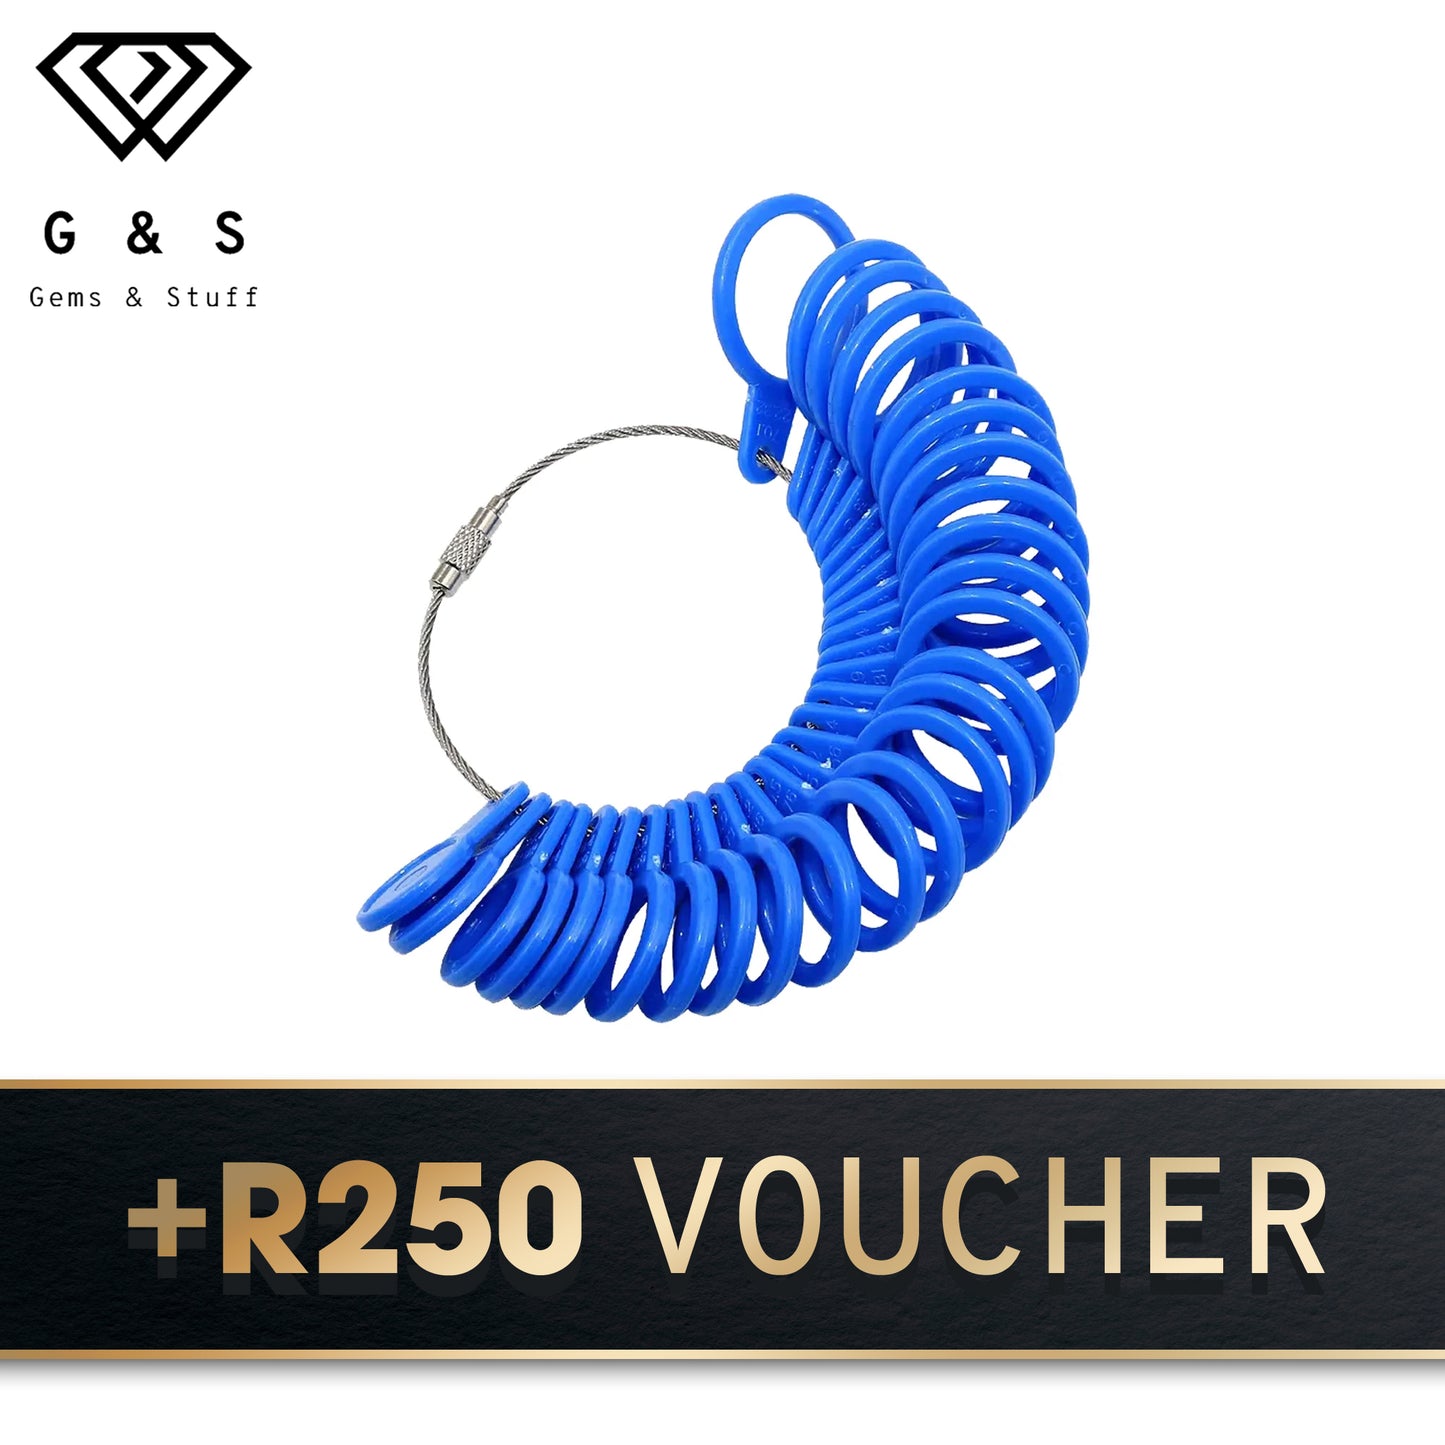 Don`t know your size - G&S Ring Sizing Kit Plus R250 Voucher